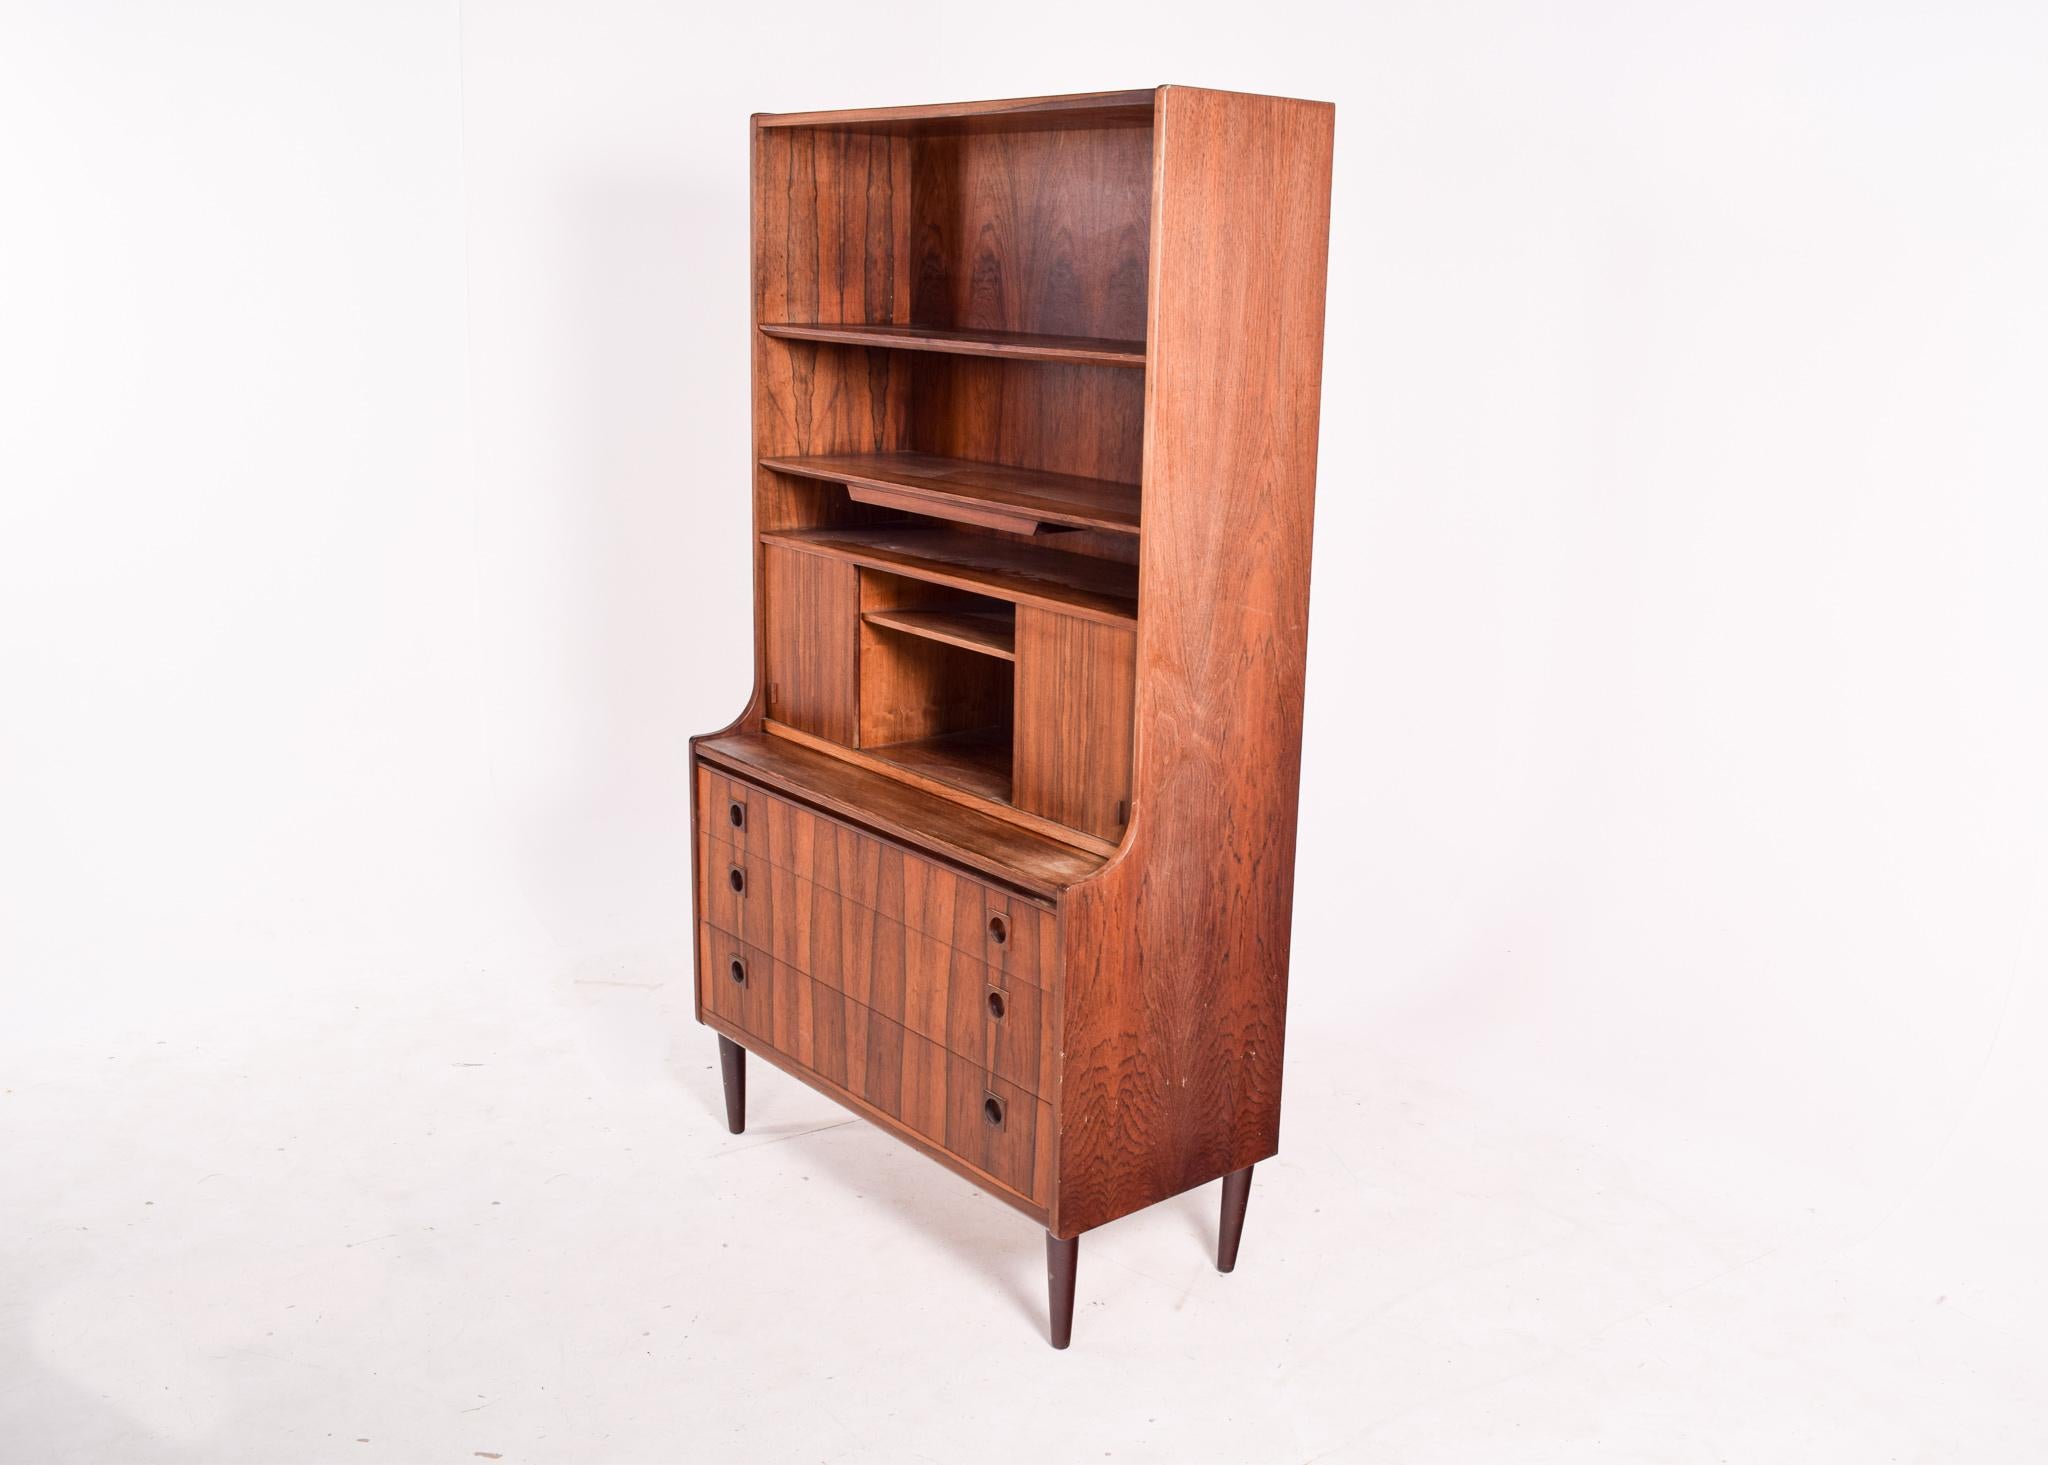 A beautiful Danish rosewood desk cabinet with upper shelving. Features adjustable shelving with additional storage behind the 2 sliding doors and an extendable writing surface. Has a mirror, so you can use this cabinet on your bedroom. Great compact